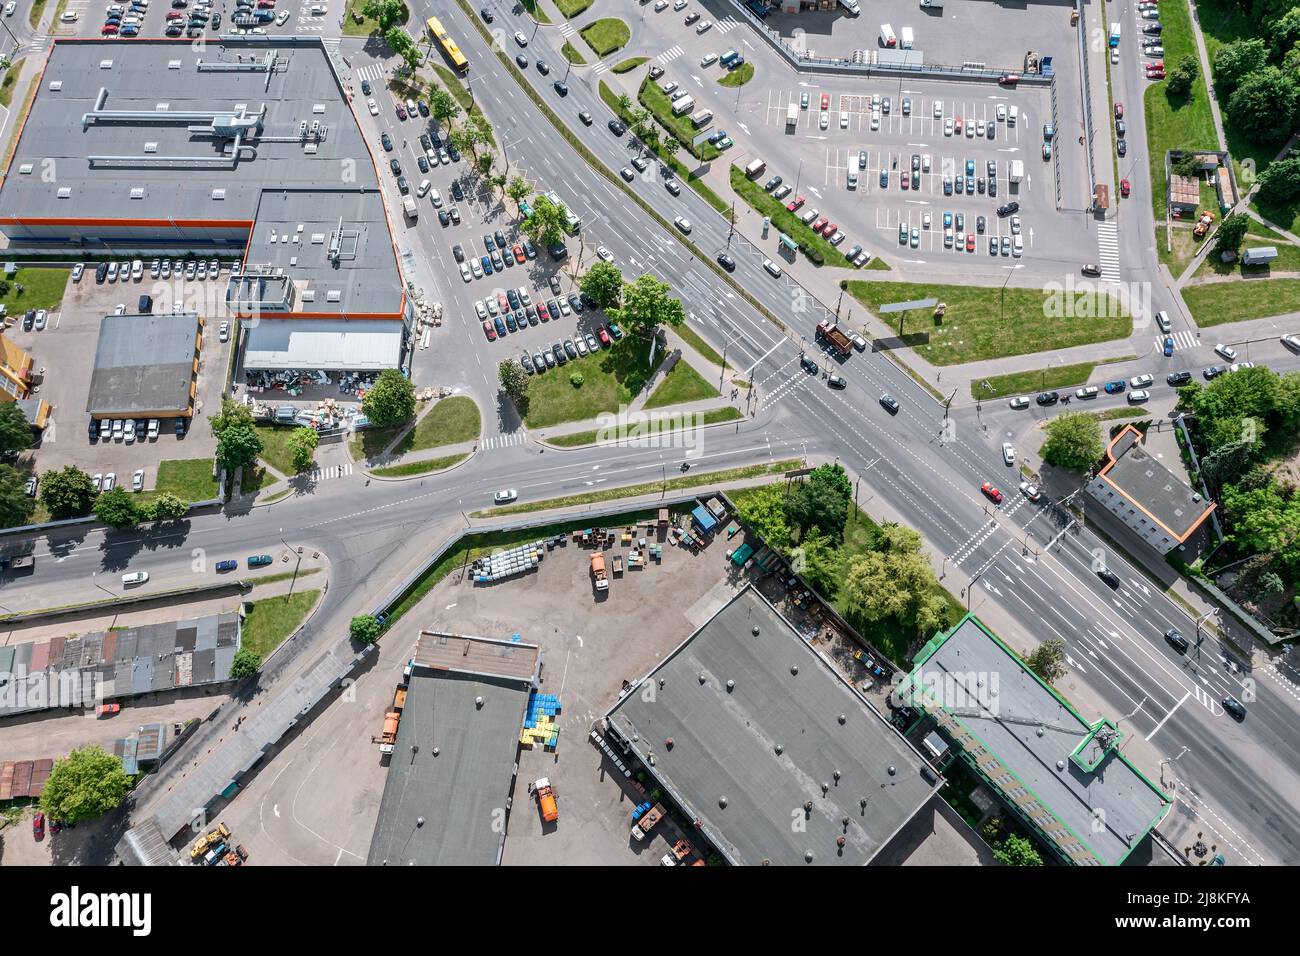 overhead view of urban crossroad near shopping mall and parking lot with cars Stock Photo